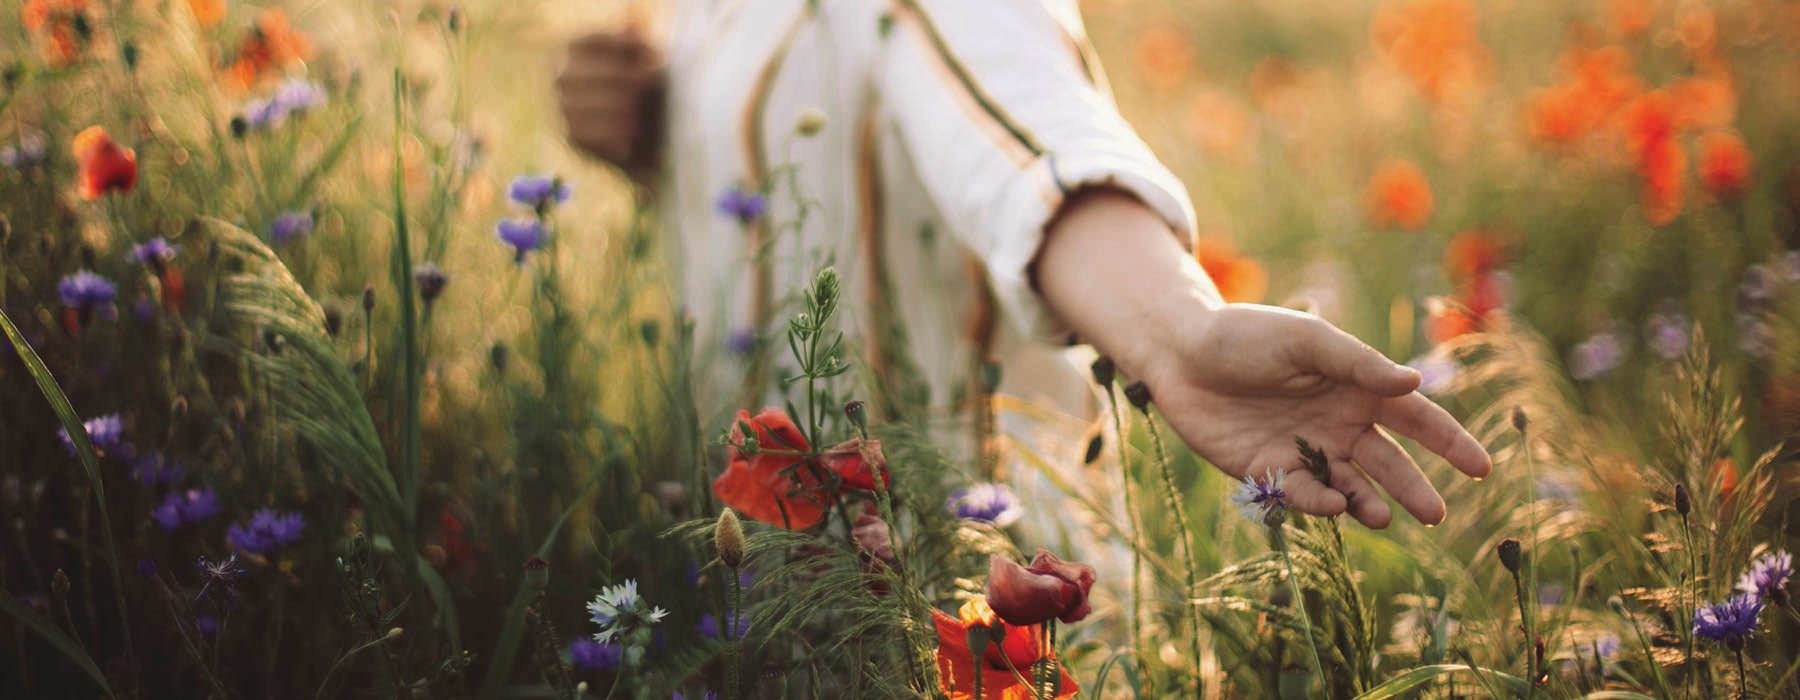 woman runs her hand over wild flowers in a field